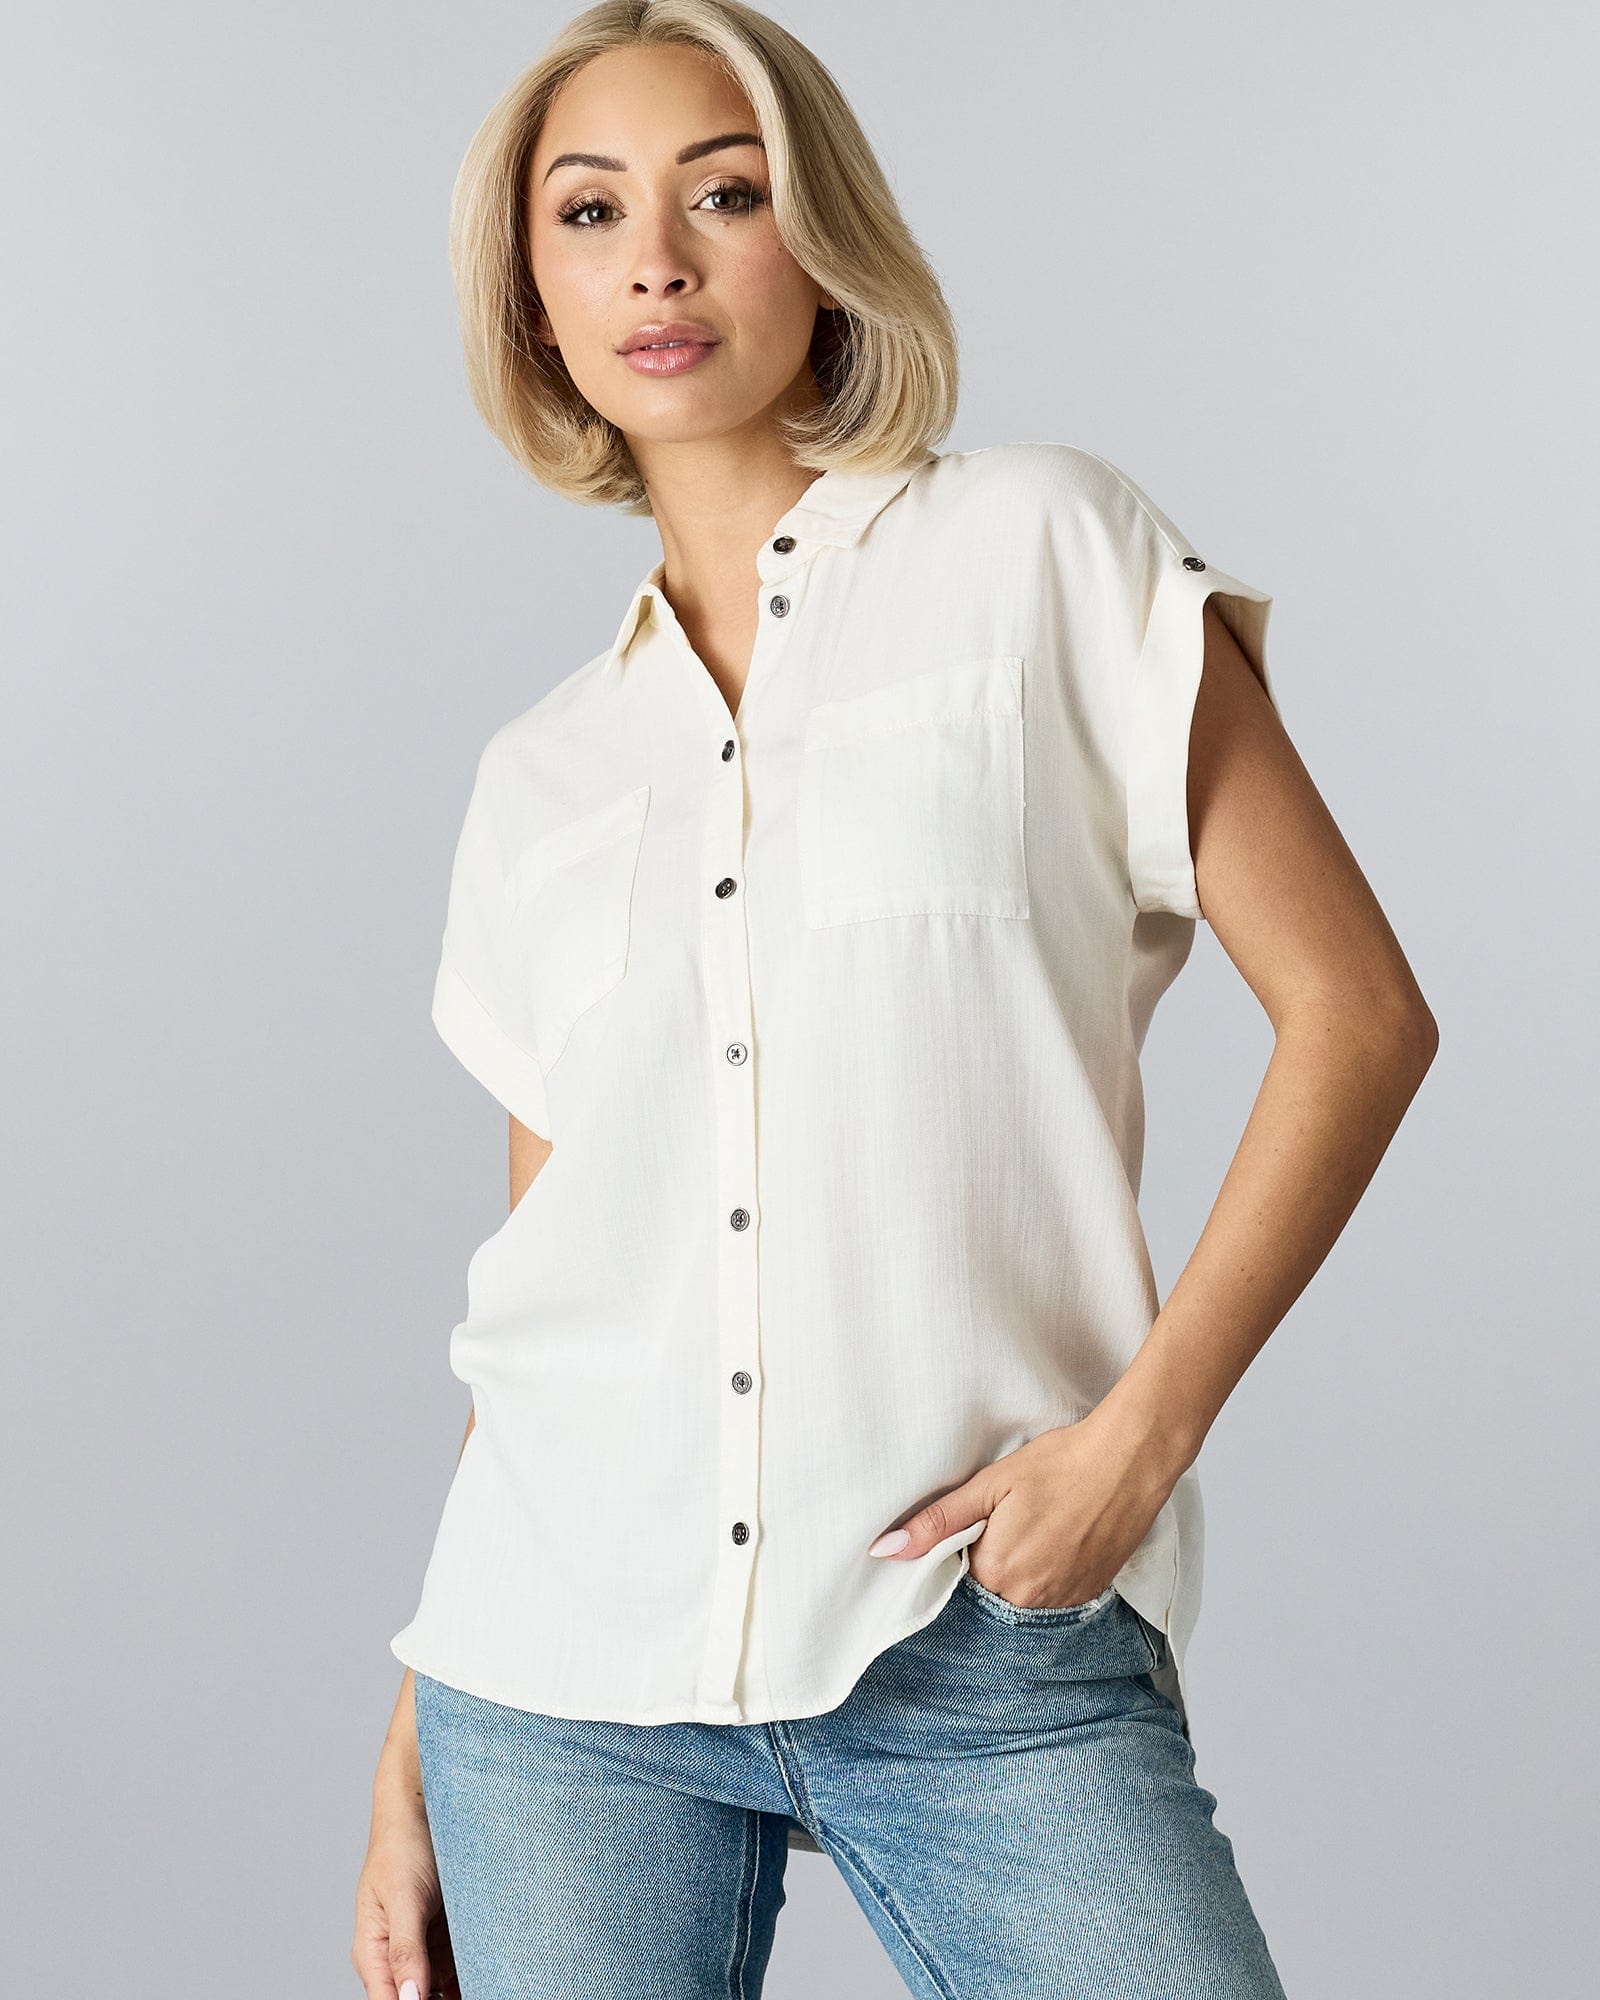 Tops, Downeast Women's Clothing & Accessories